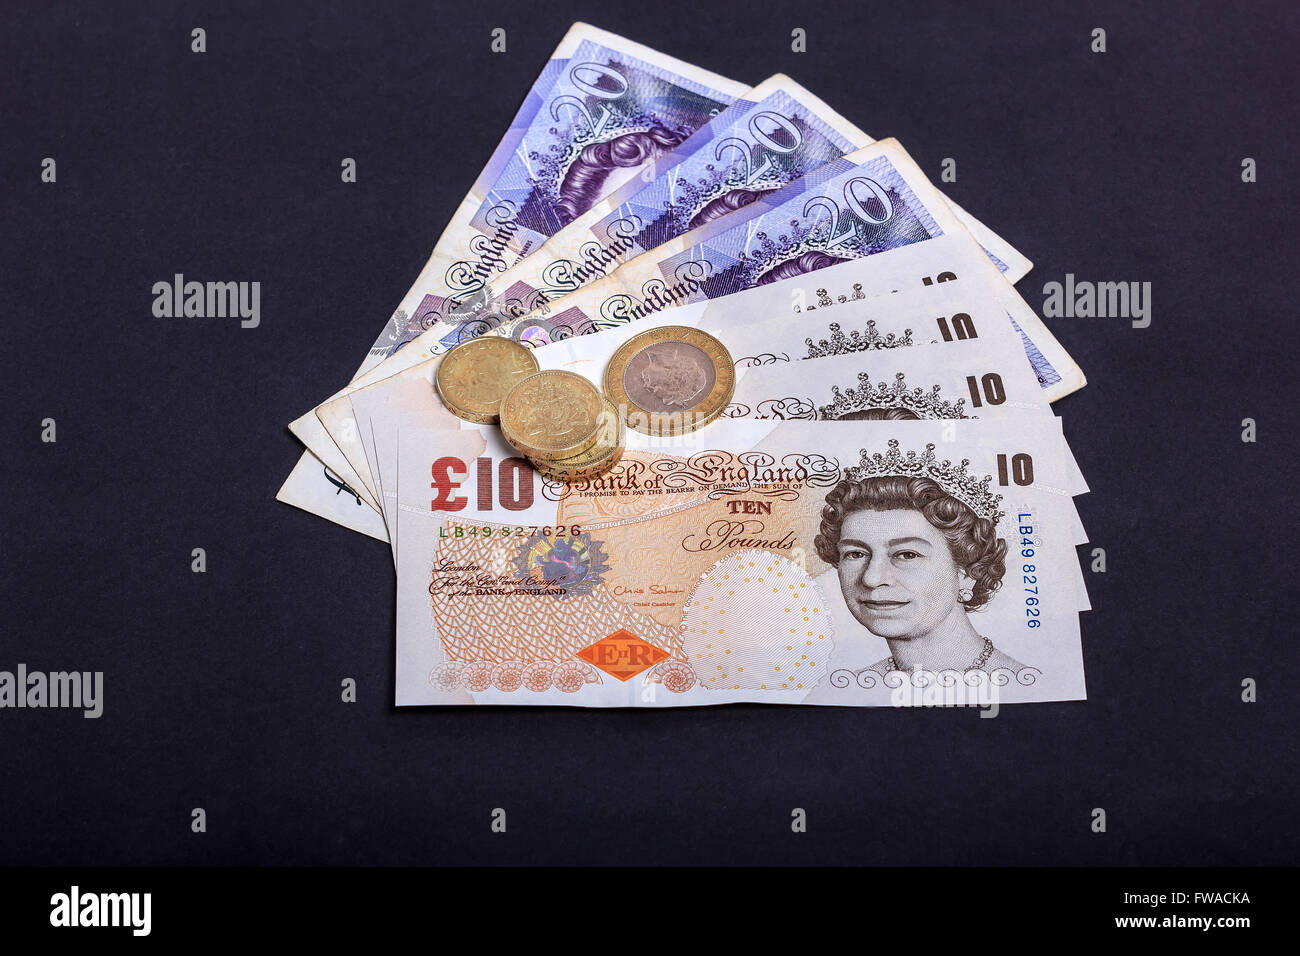 Pound notes and coins British Sterling Stock Photo